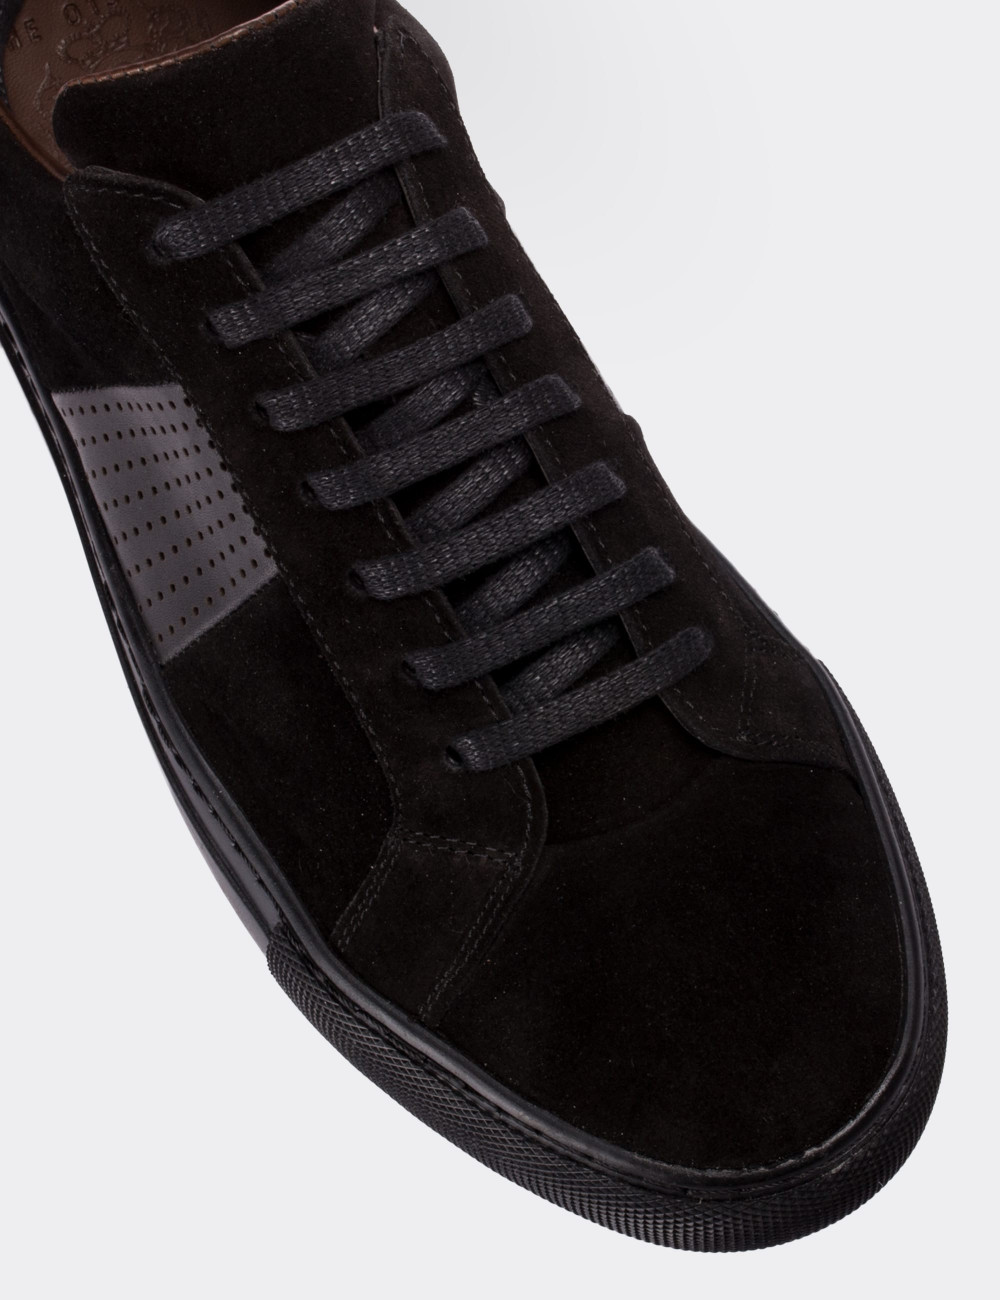 Black Suede Leather Sneakers - 01740MSYHC01